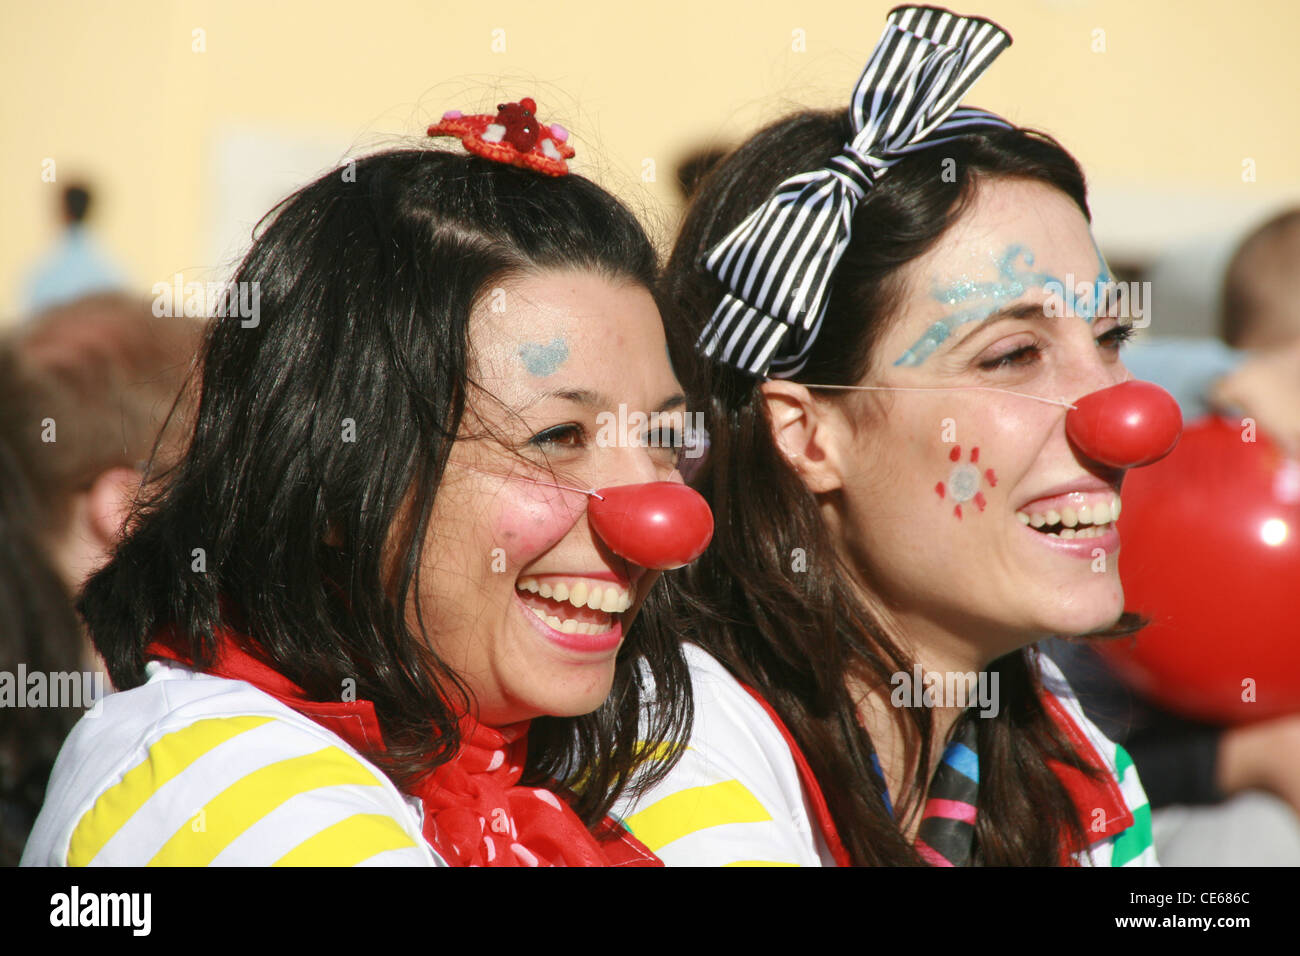 Red Nose Day Stock Photos & Red Nose Day Stock Images - Alamy